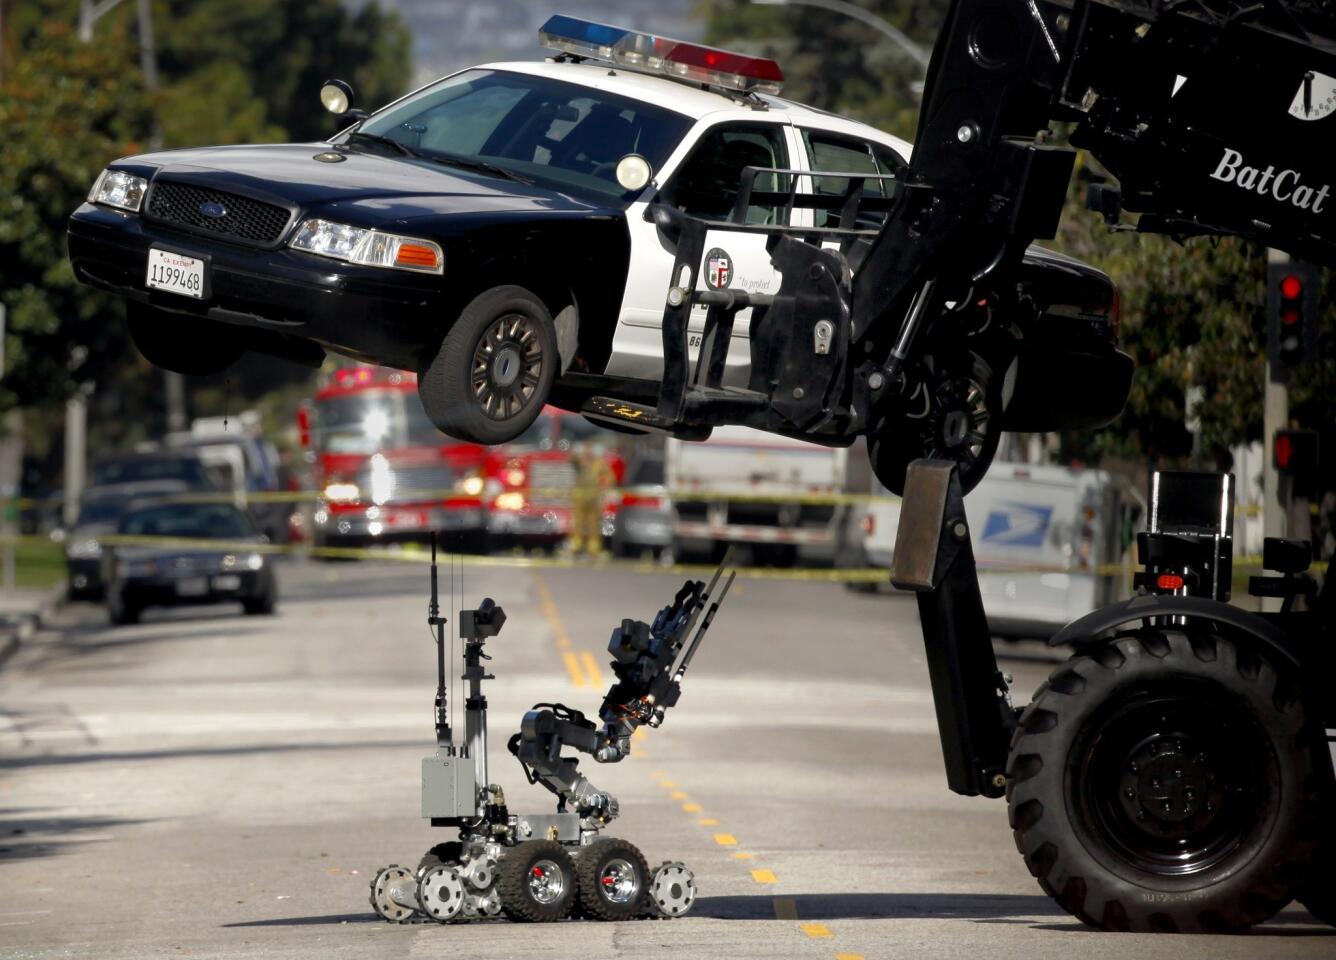 Los Angeles Police Department bomb squad members take a closer look at the underside of an LAPD patrol car with a robotic device after authorities received a call that a bomb had been planted in the vehicle on Harvard Boulevard near Wilshire Boulevard.